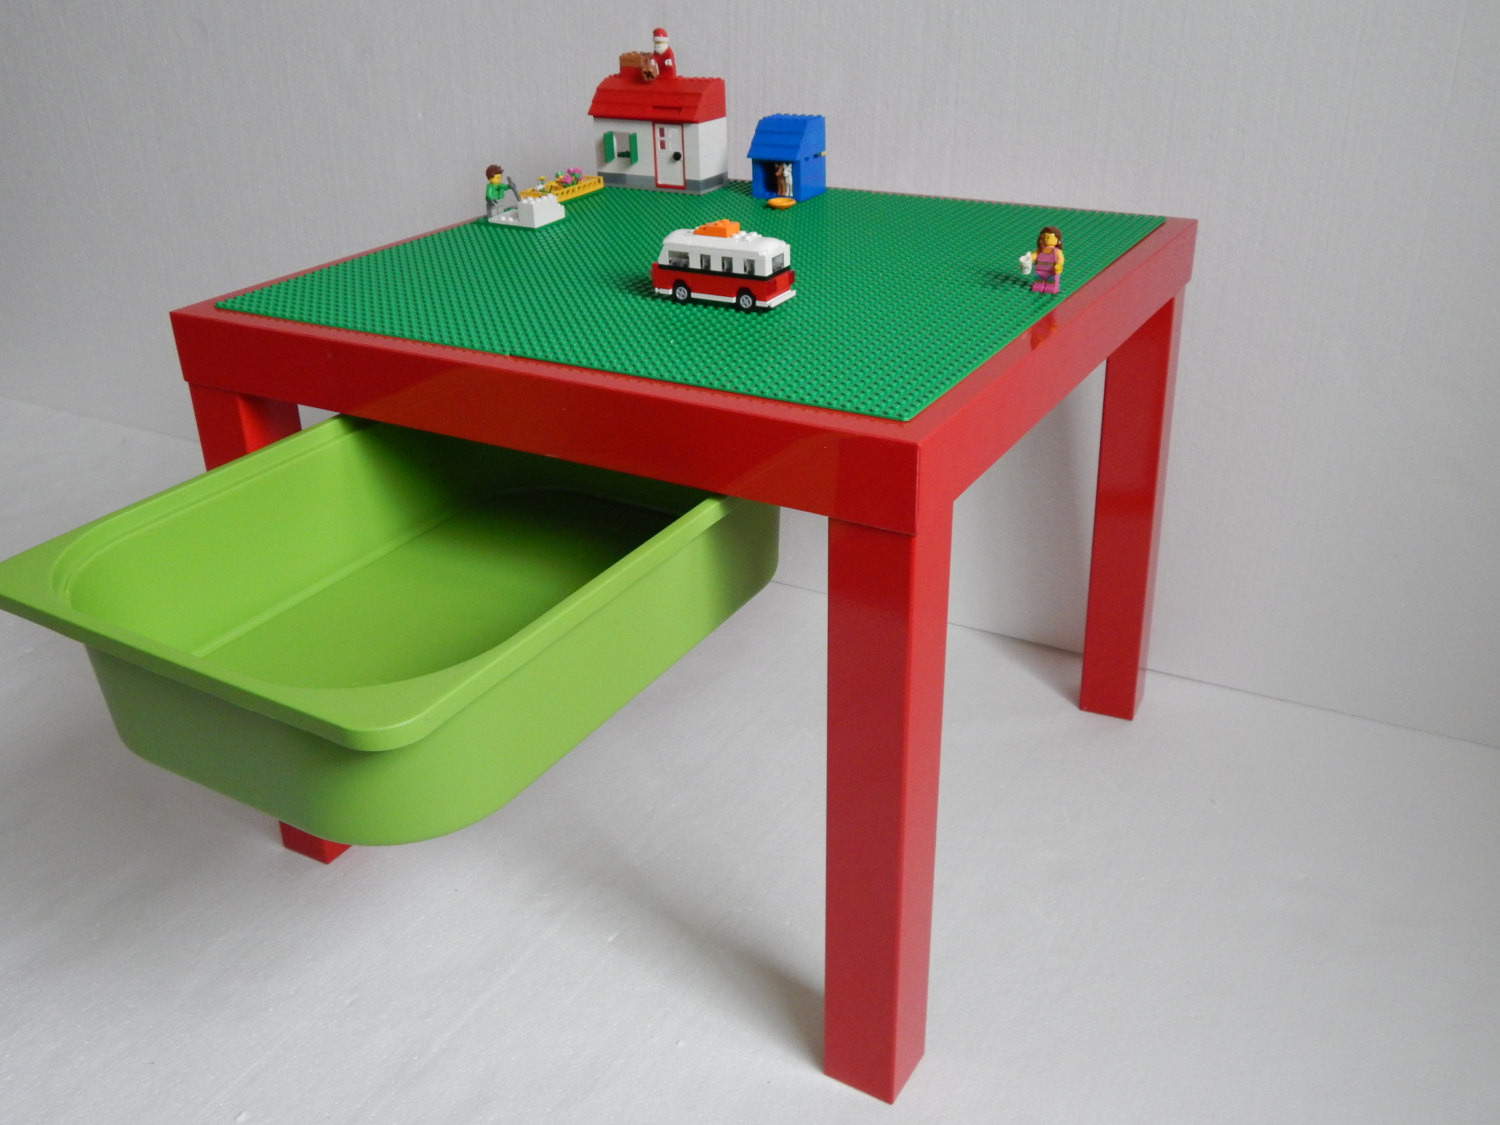 Kids Lego Table
 Kids LEGO Table with Storage 20x20 Green